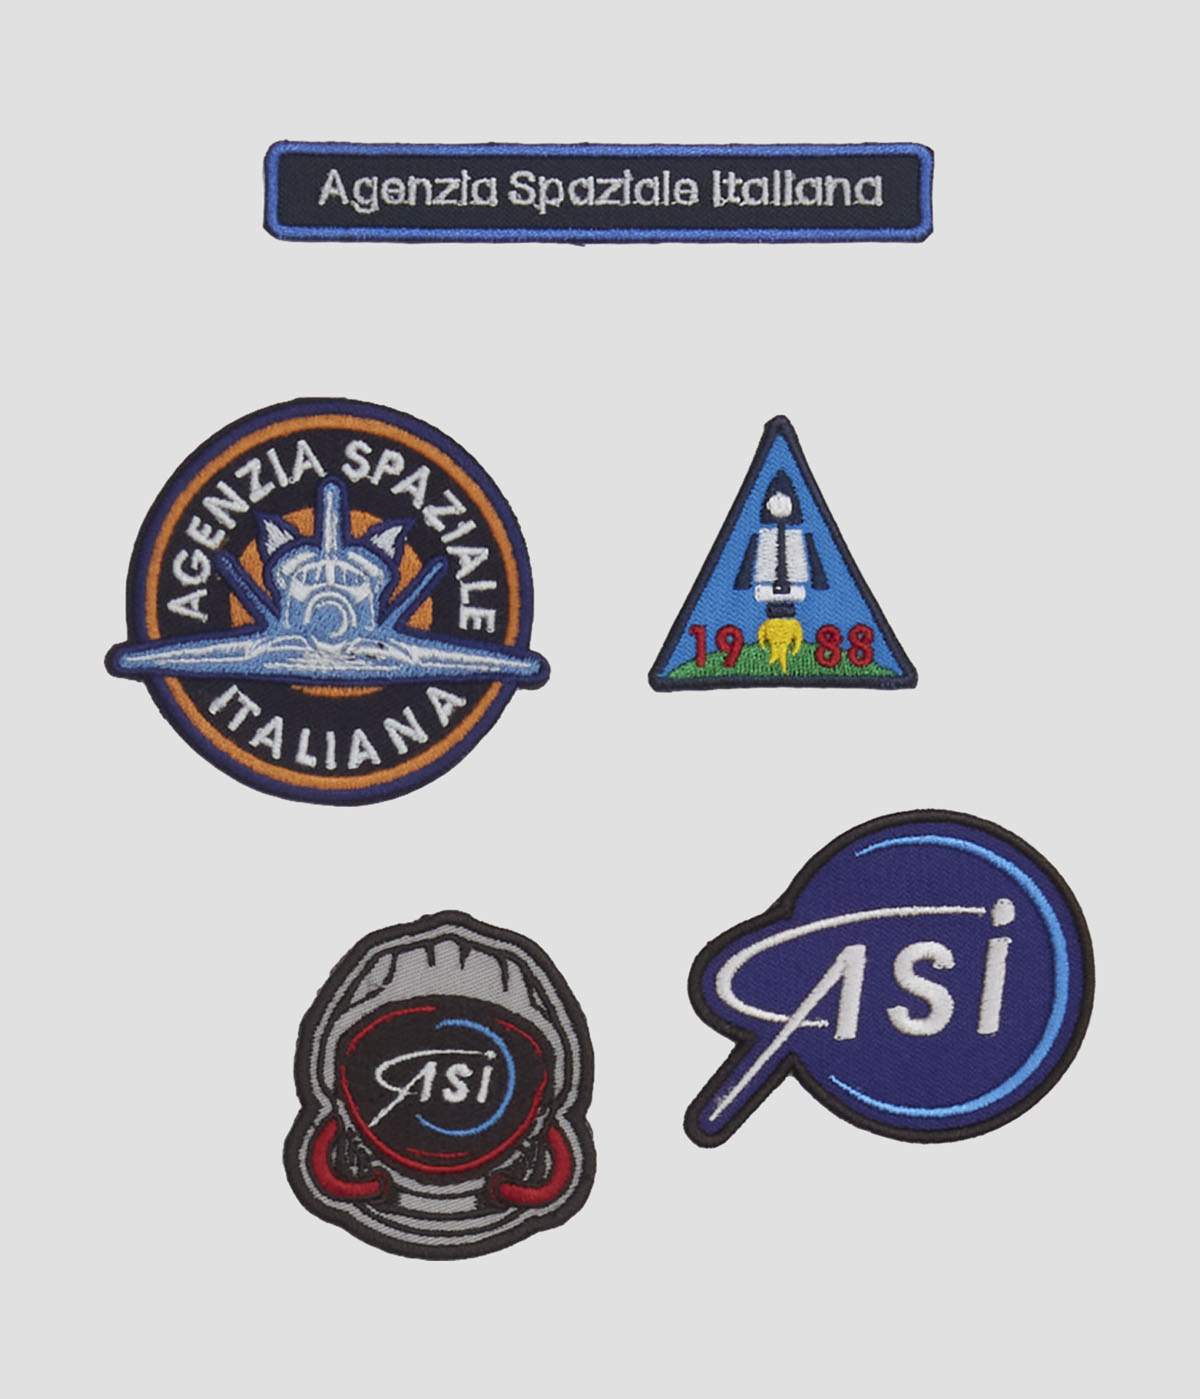 https://asiofficialstore.com/wp-content/uploads/SNDZZ040CT3364-94501-asi-patches-adhesive-five-0.jpg